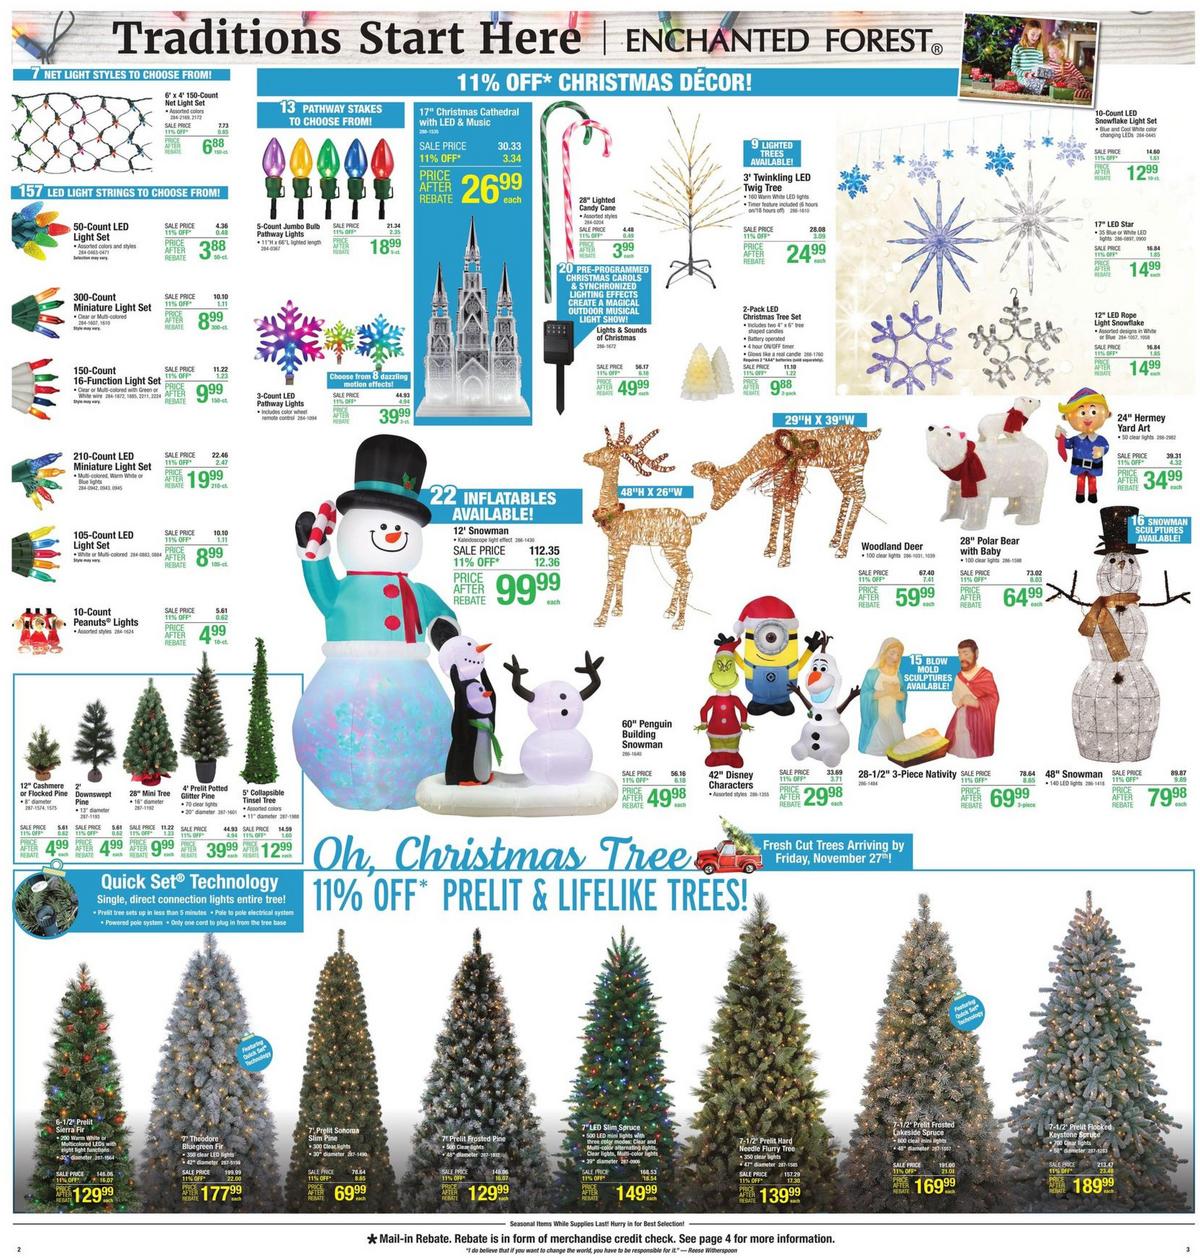 Menards Christmas Decor Sale Weekly Ad from November 15